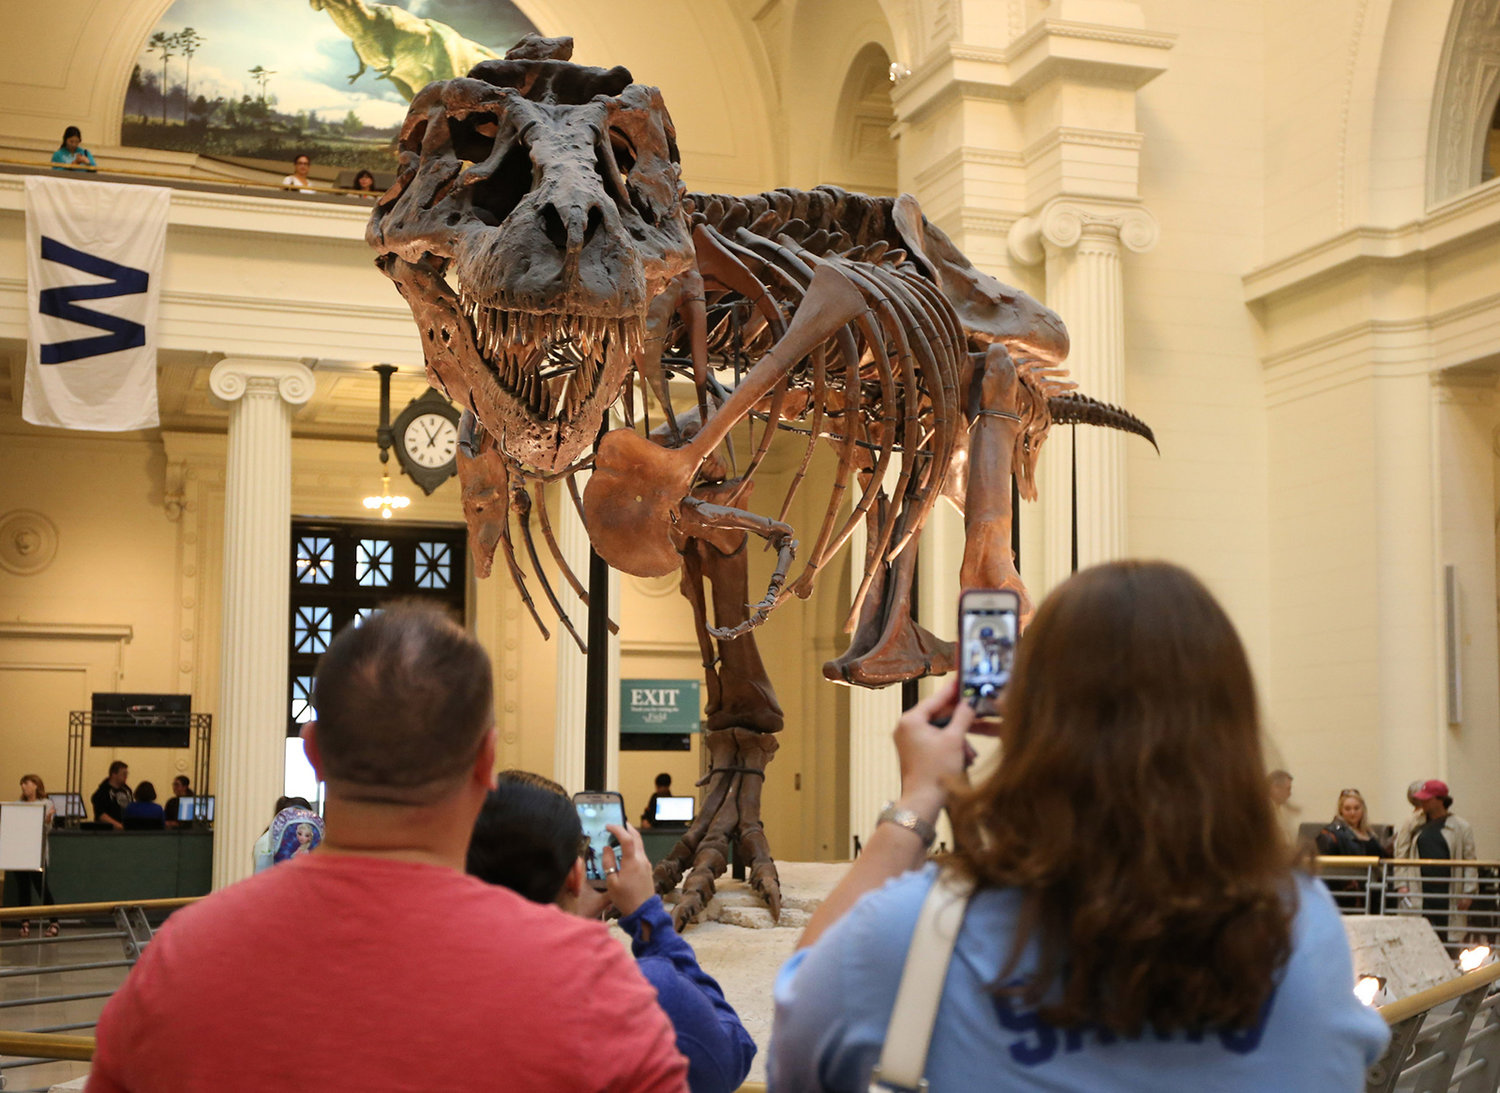 Sue the T. rex strikes a pose in its old location at the Field Museum in Chicago, Illinois. (Antonio Perez /Chicago Tribune/TNS)